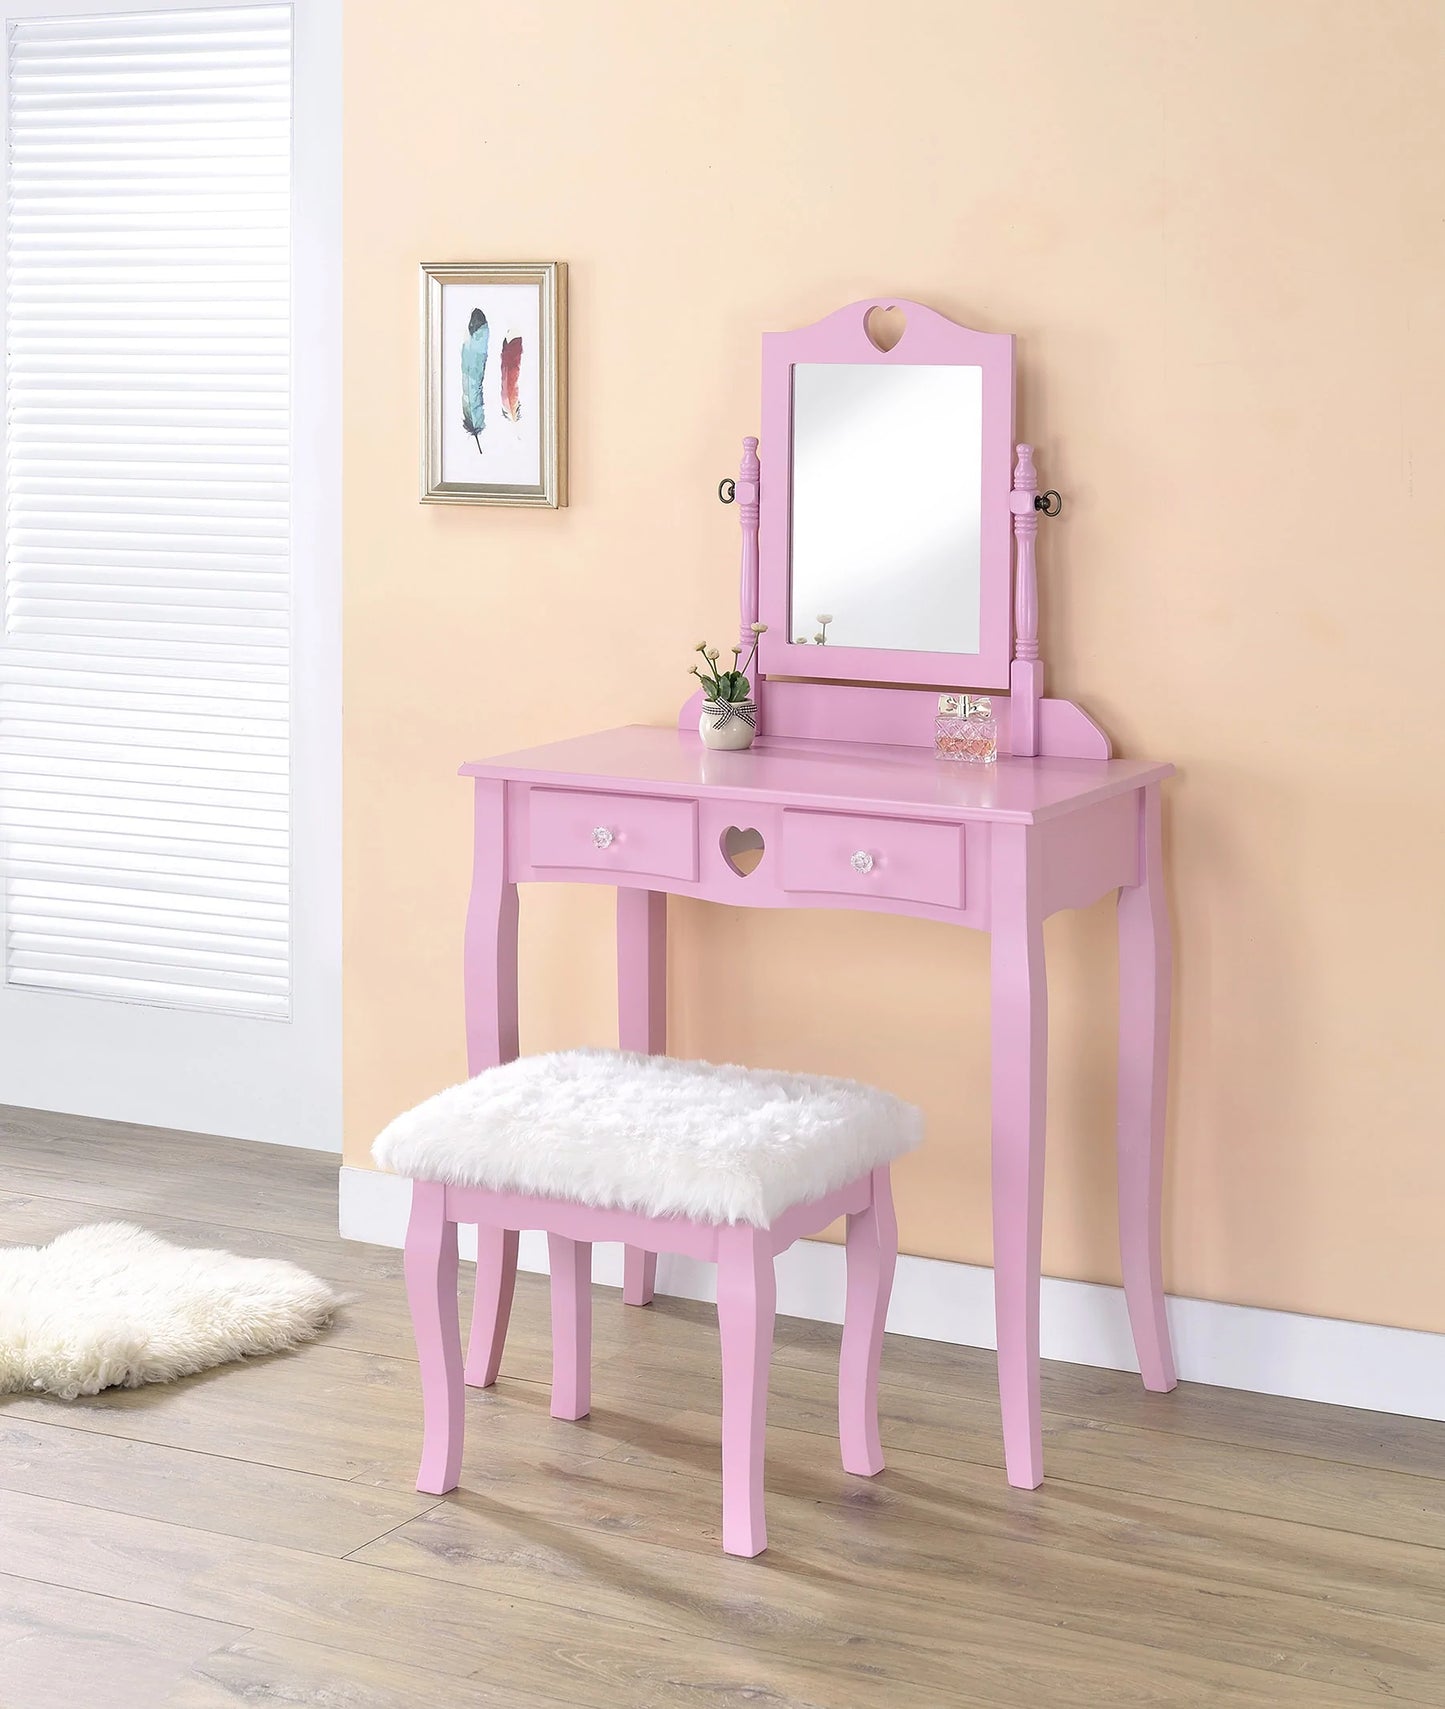 Vanity Set with Heart Design Pink Finish